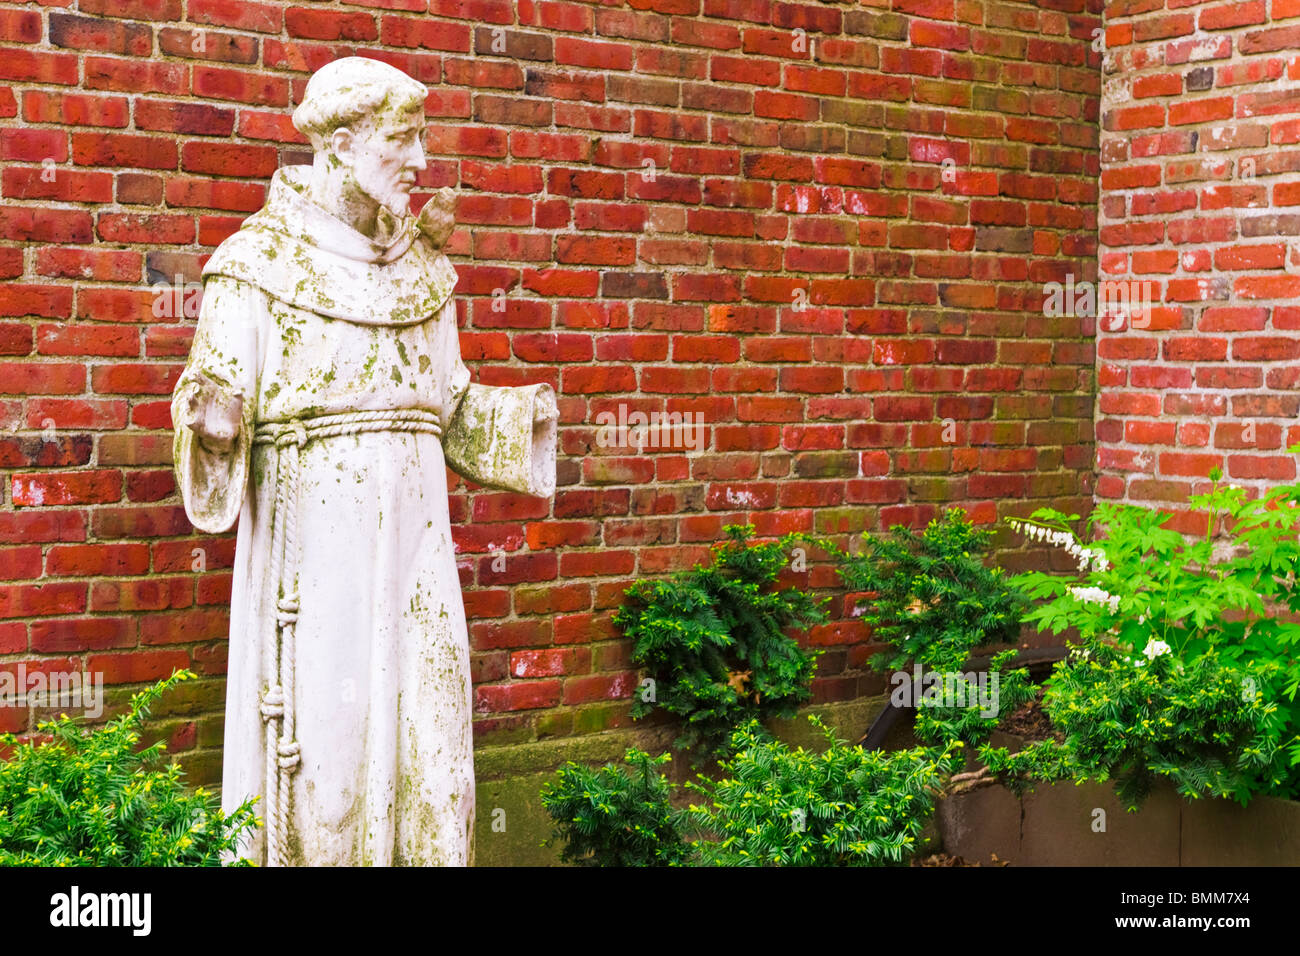 St. Francis of Assisi Garden at the Old North Church, Freedom Trail, Boston, Massachusetts Stock Photo